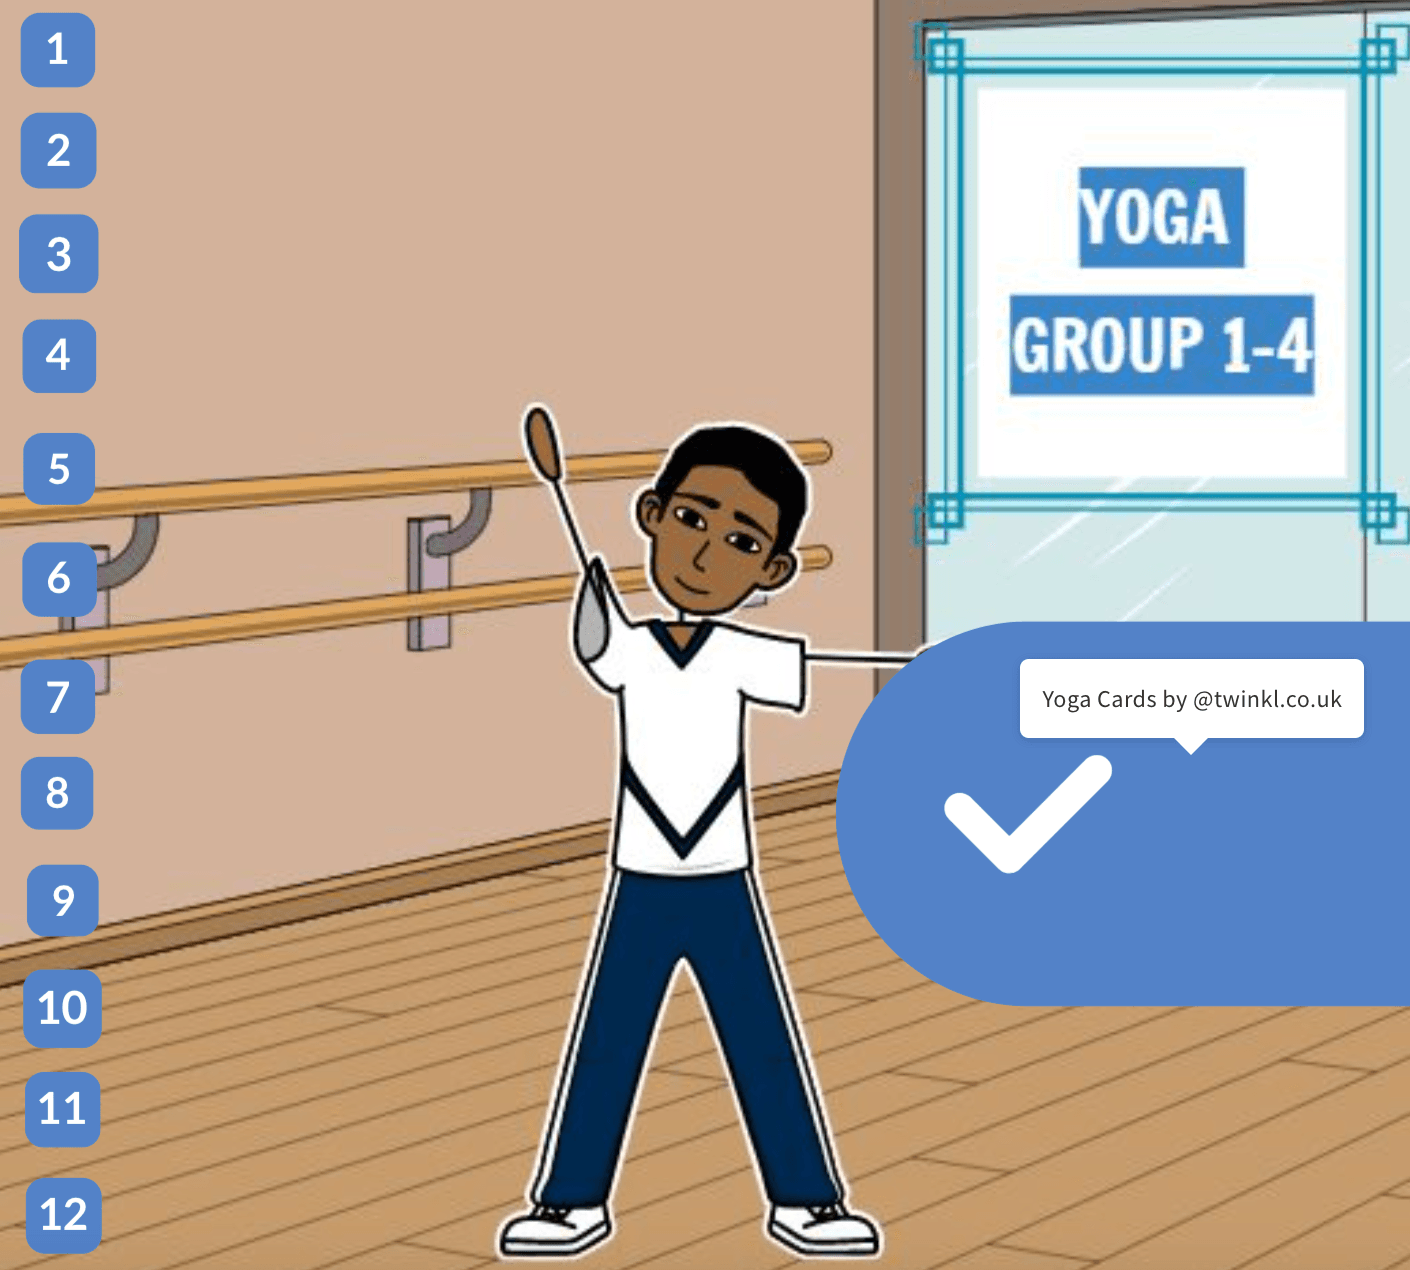 Yoga in group 1-4